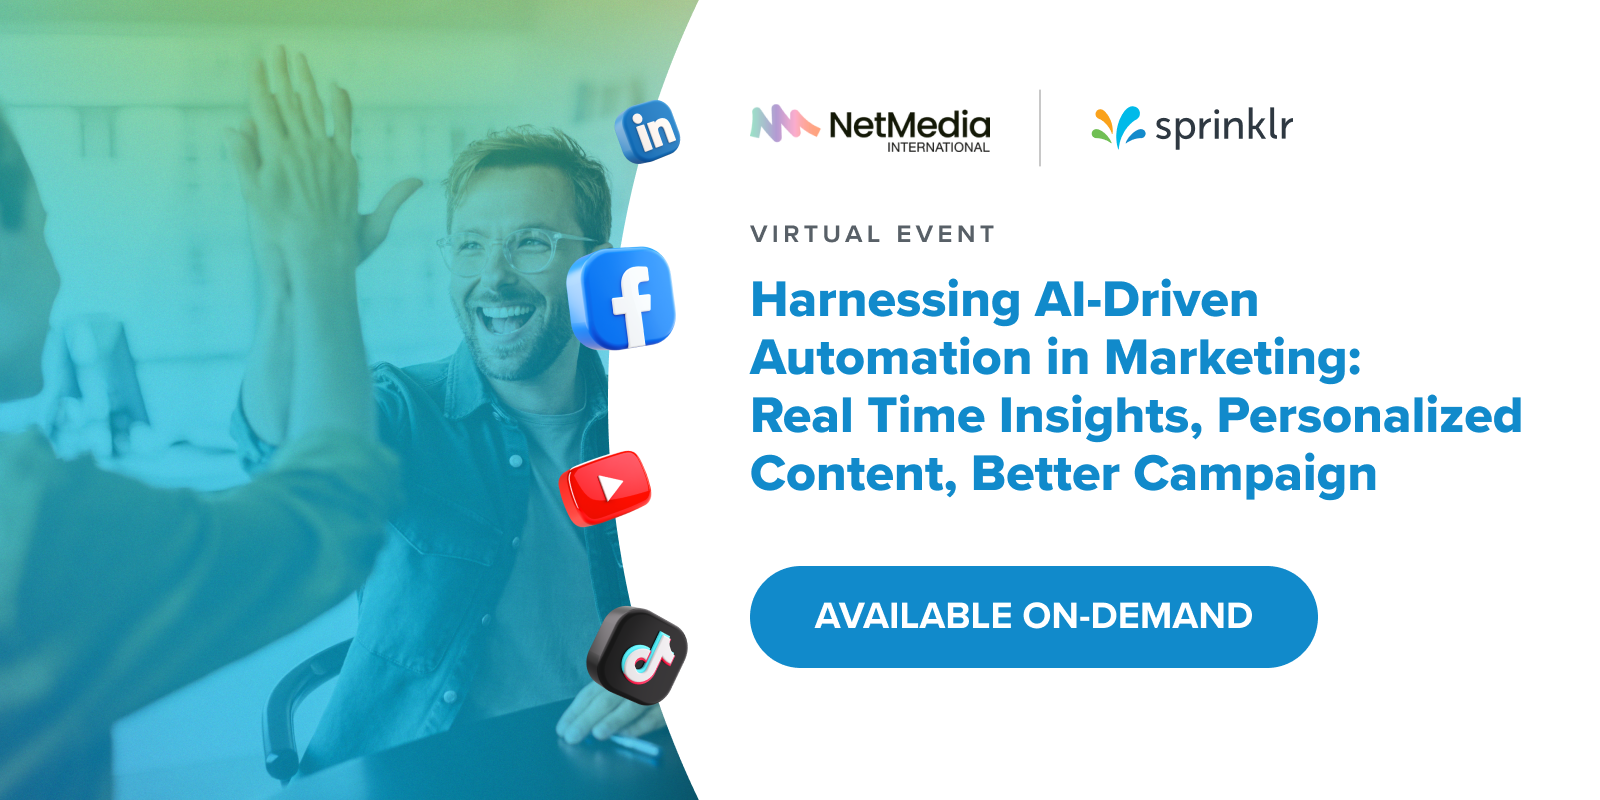 Harnessing AI-Driven Automation in Marketing: Real Time Insights, Personalized Content, Better Campaigns